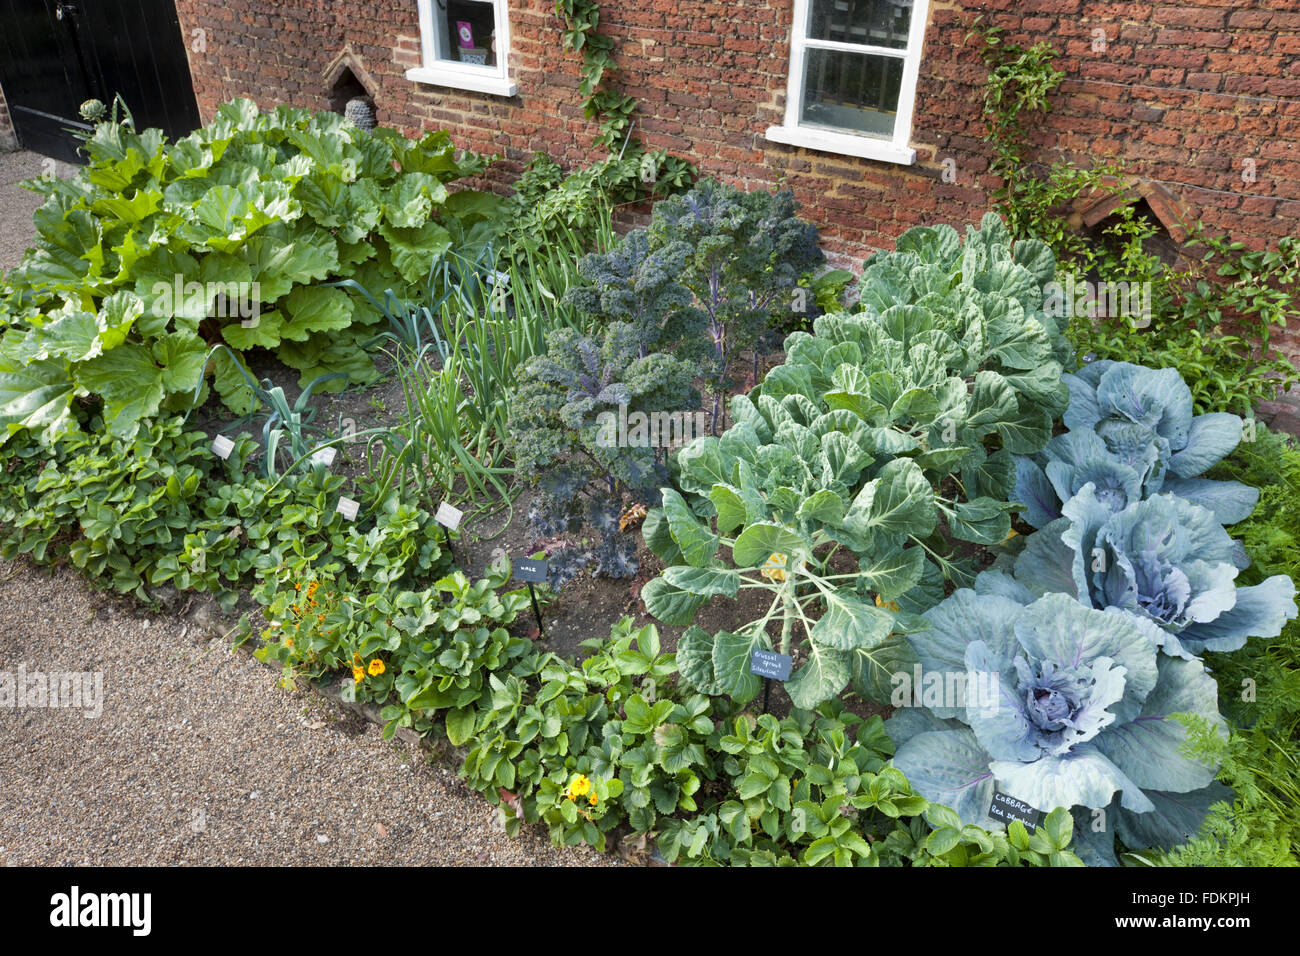 The Kitchen bed with vegetables growing in August at Quebec House, Westerham, Kent. Stock Photo